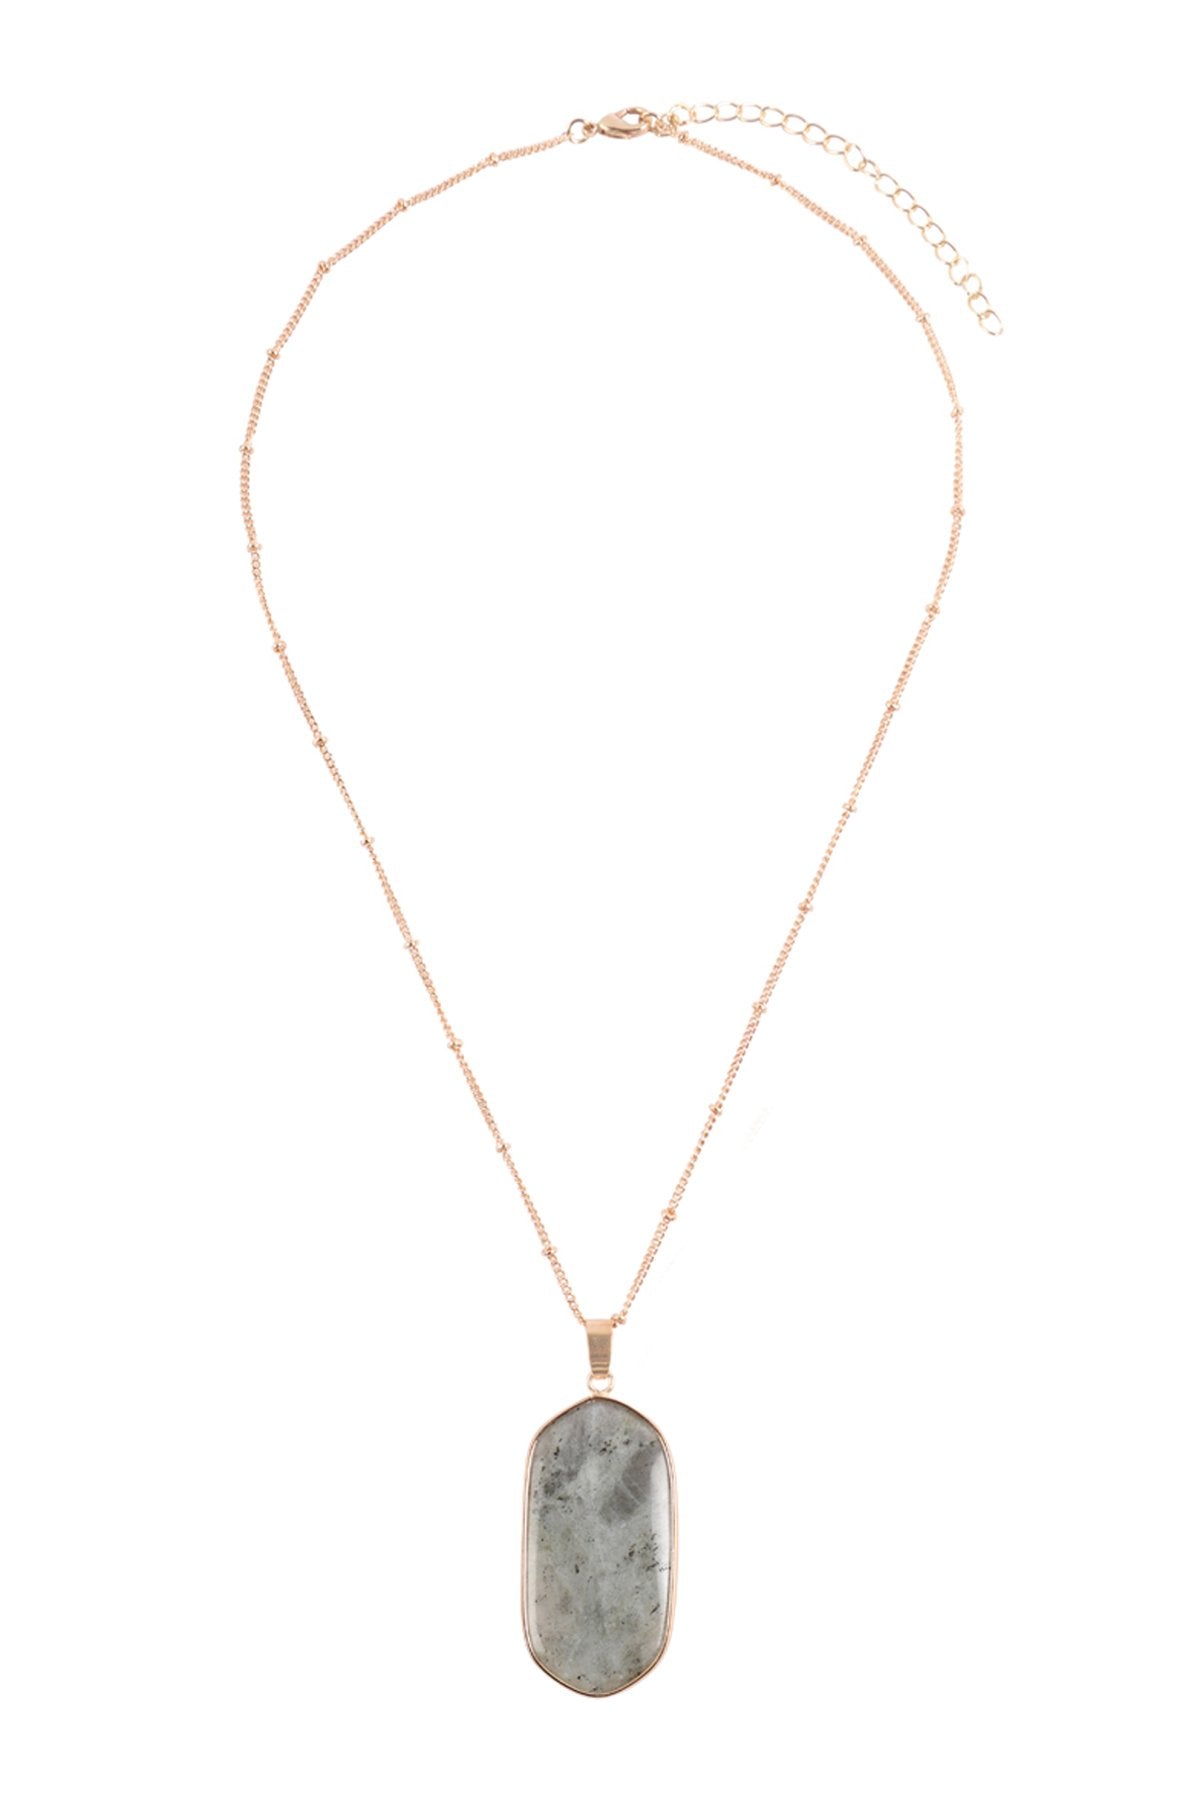 Hdn3184 - Stone Pendant Charm Necklace - LOLA LUXE